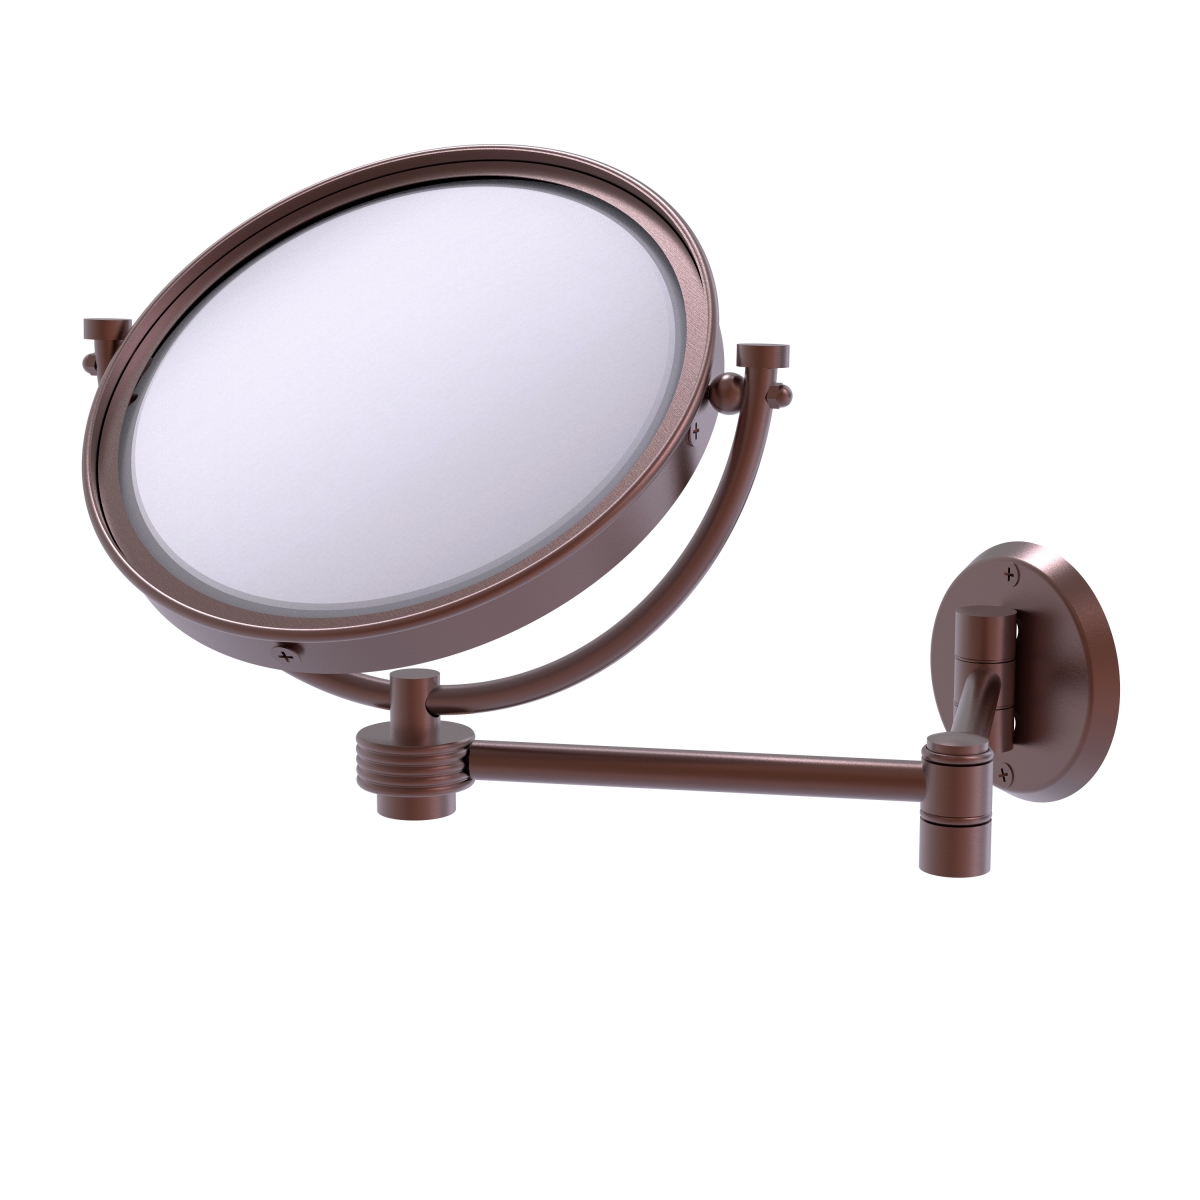 WM-6G-2X-CA 8 in. Wall Mounted Extending Make-Up Mirror 2X Magnification with Groovy Accent, Antique Copper -  Allied Brass, WM-6G/2X-CA